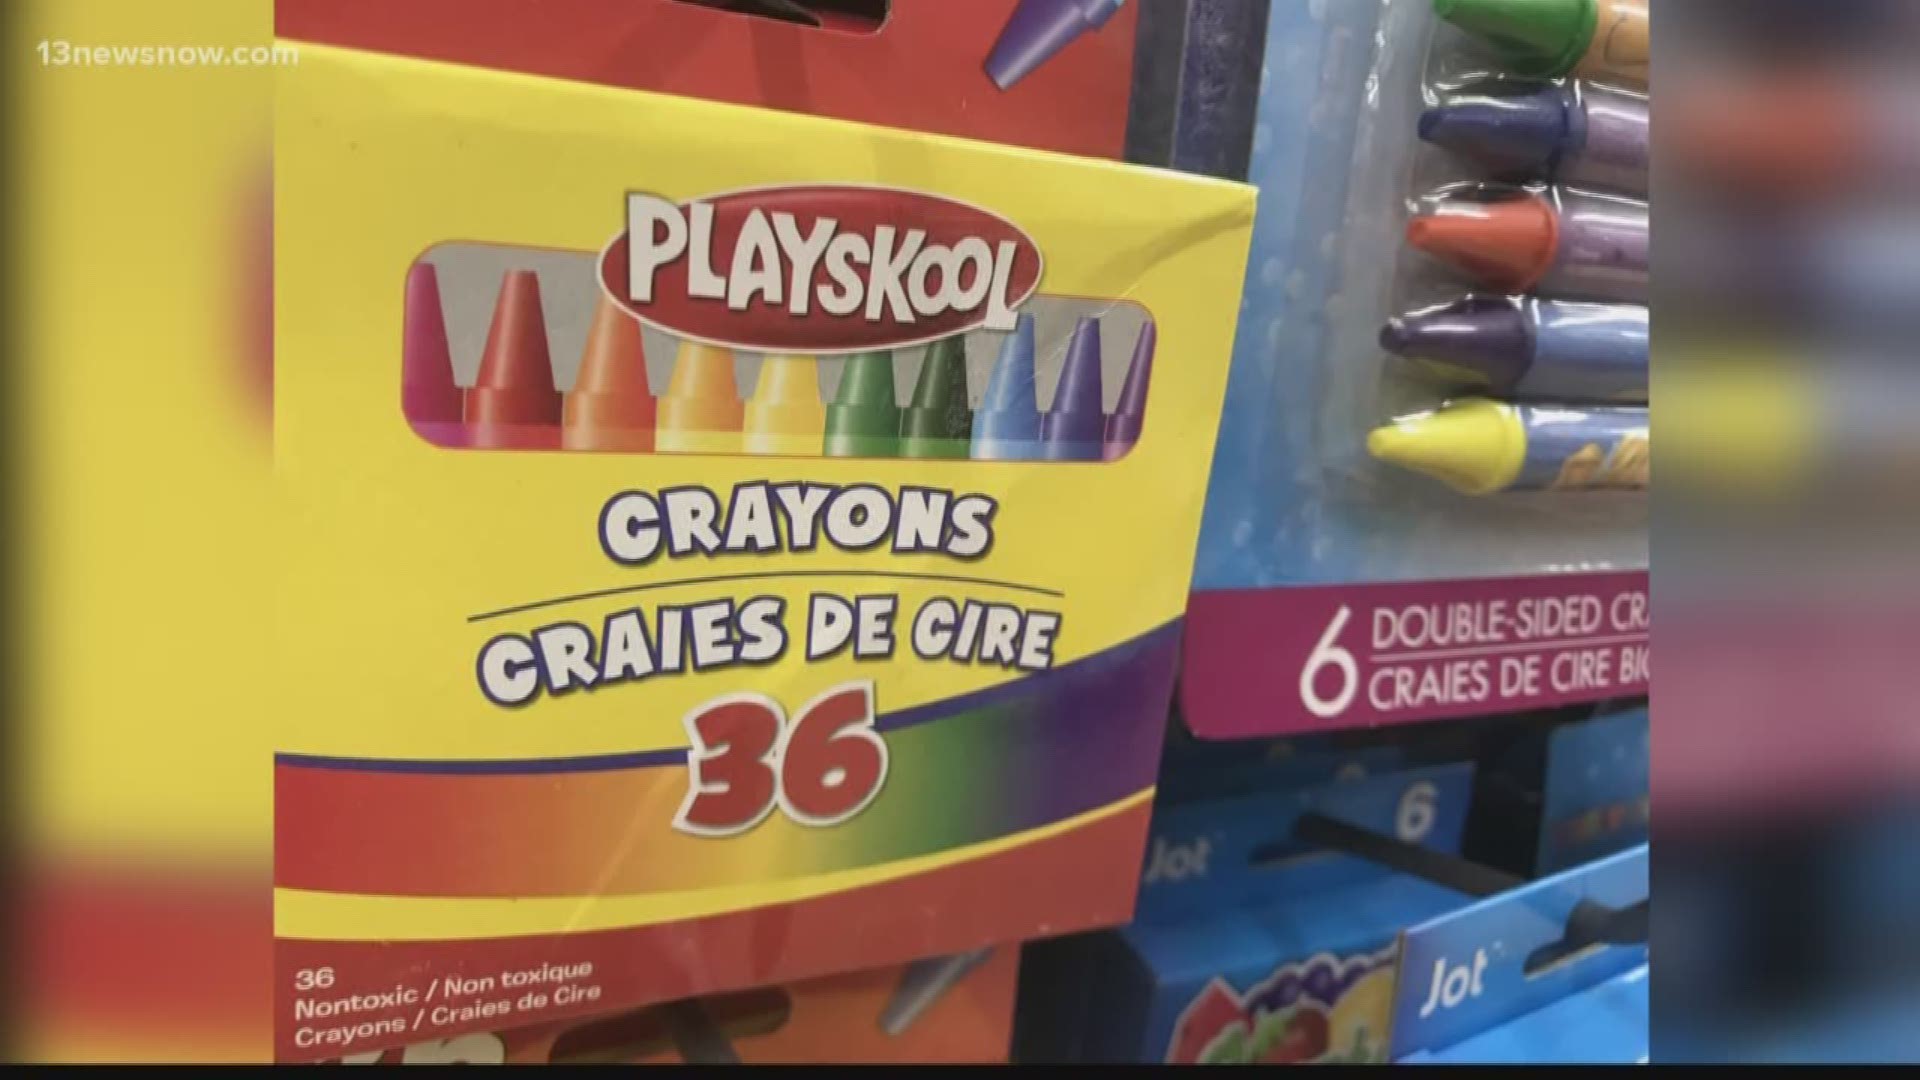 13News Now Adriana De Alba has more on how the crayons are still allowed to be sold even though asbestos was found in them.